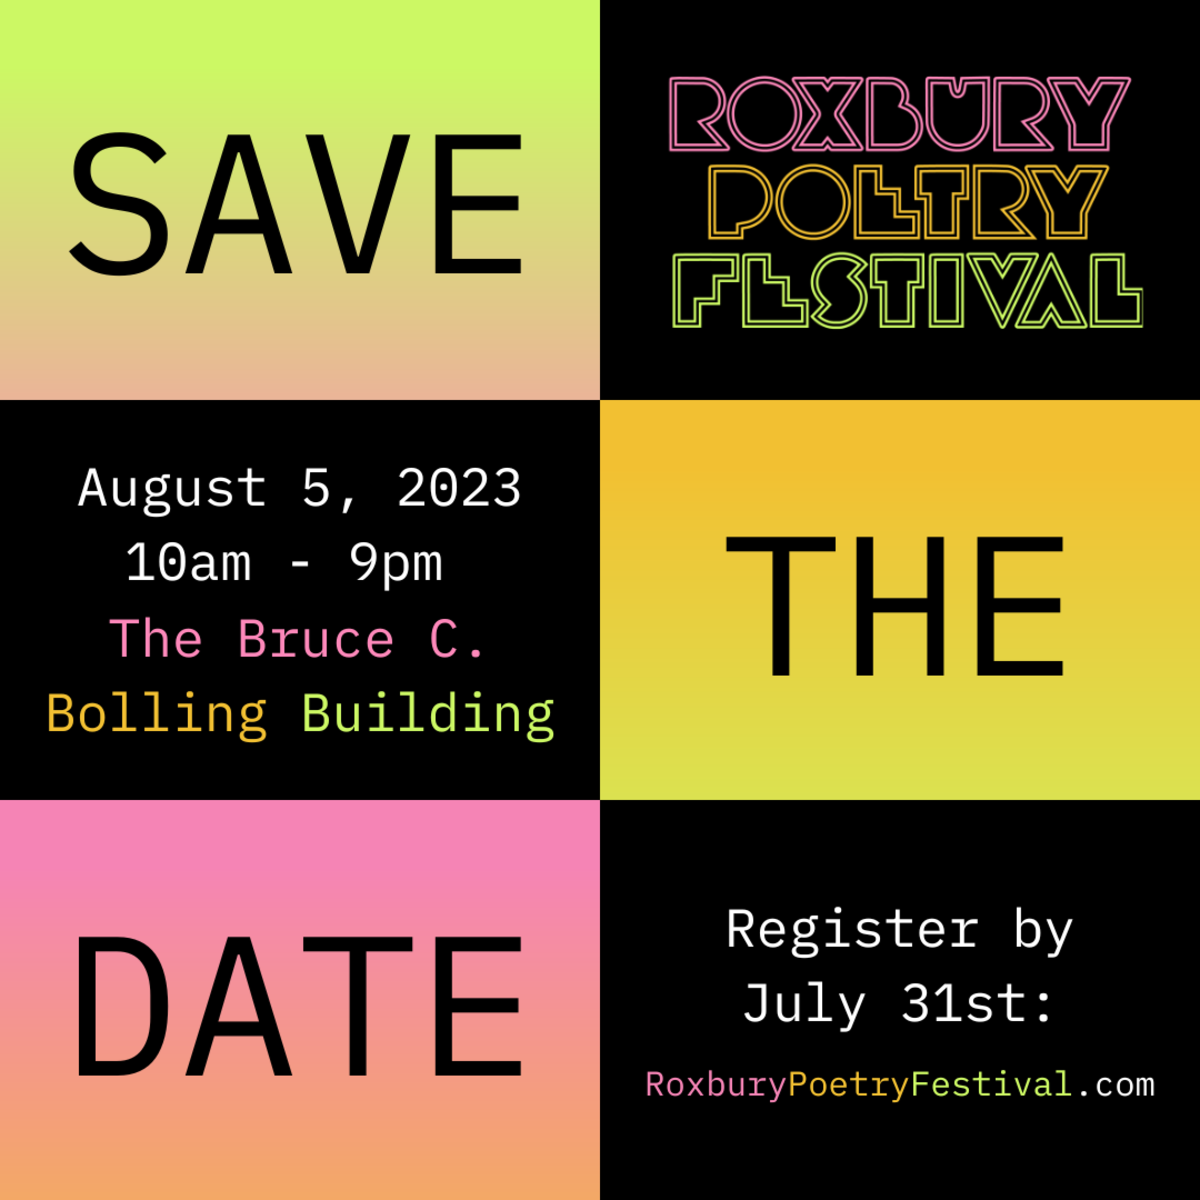 Graphic with text: SAVE THE DATE Roxbury Poetry Festival August 5, 2023 10am - 9pm The Bruce C. Bolling Building Register by July 31: RoxburyPoetryFestival.com